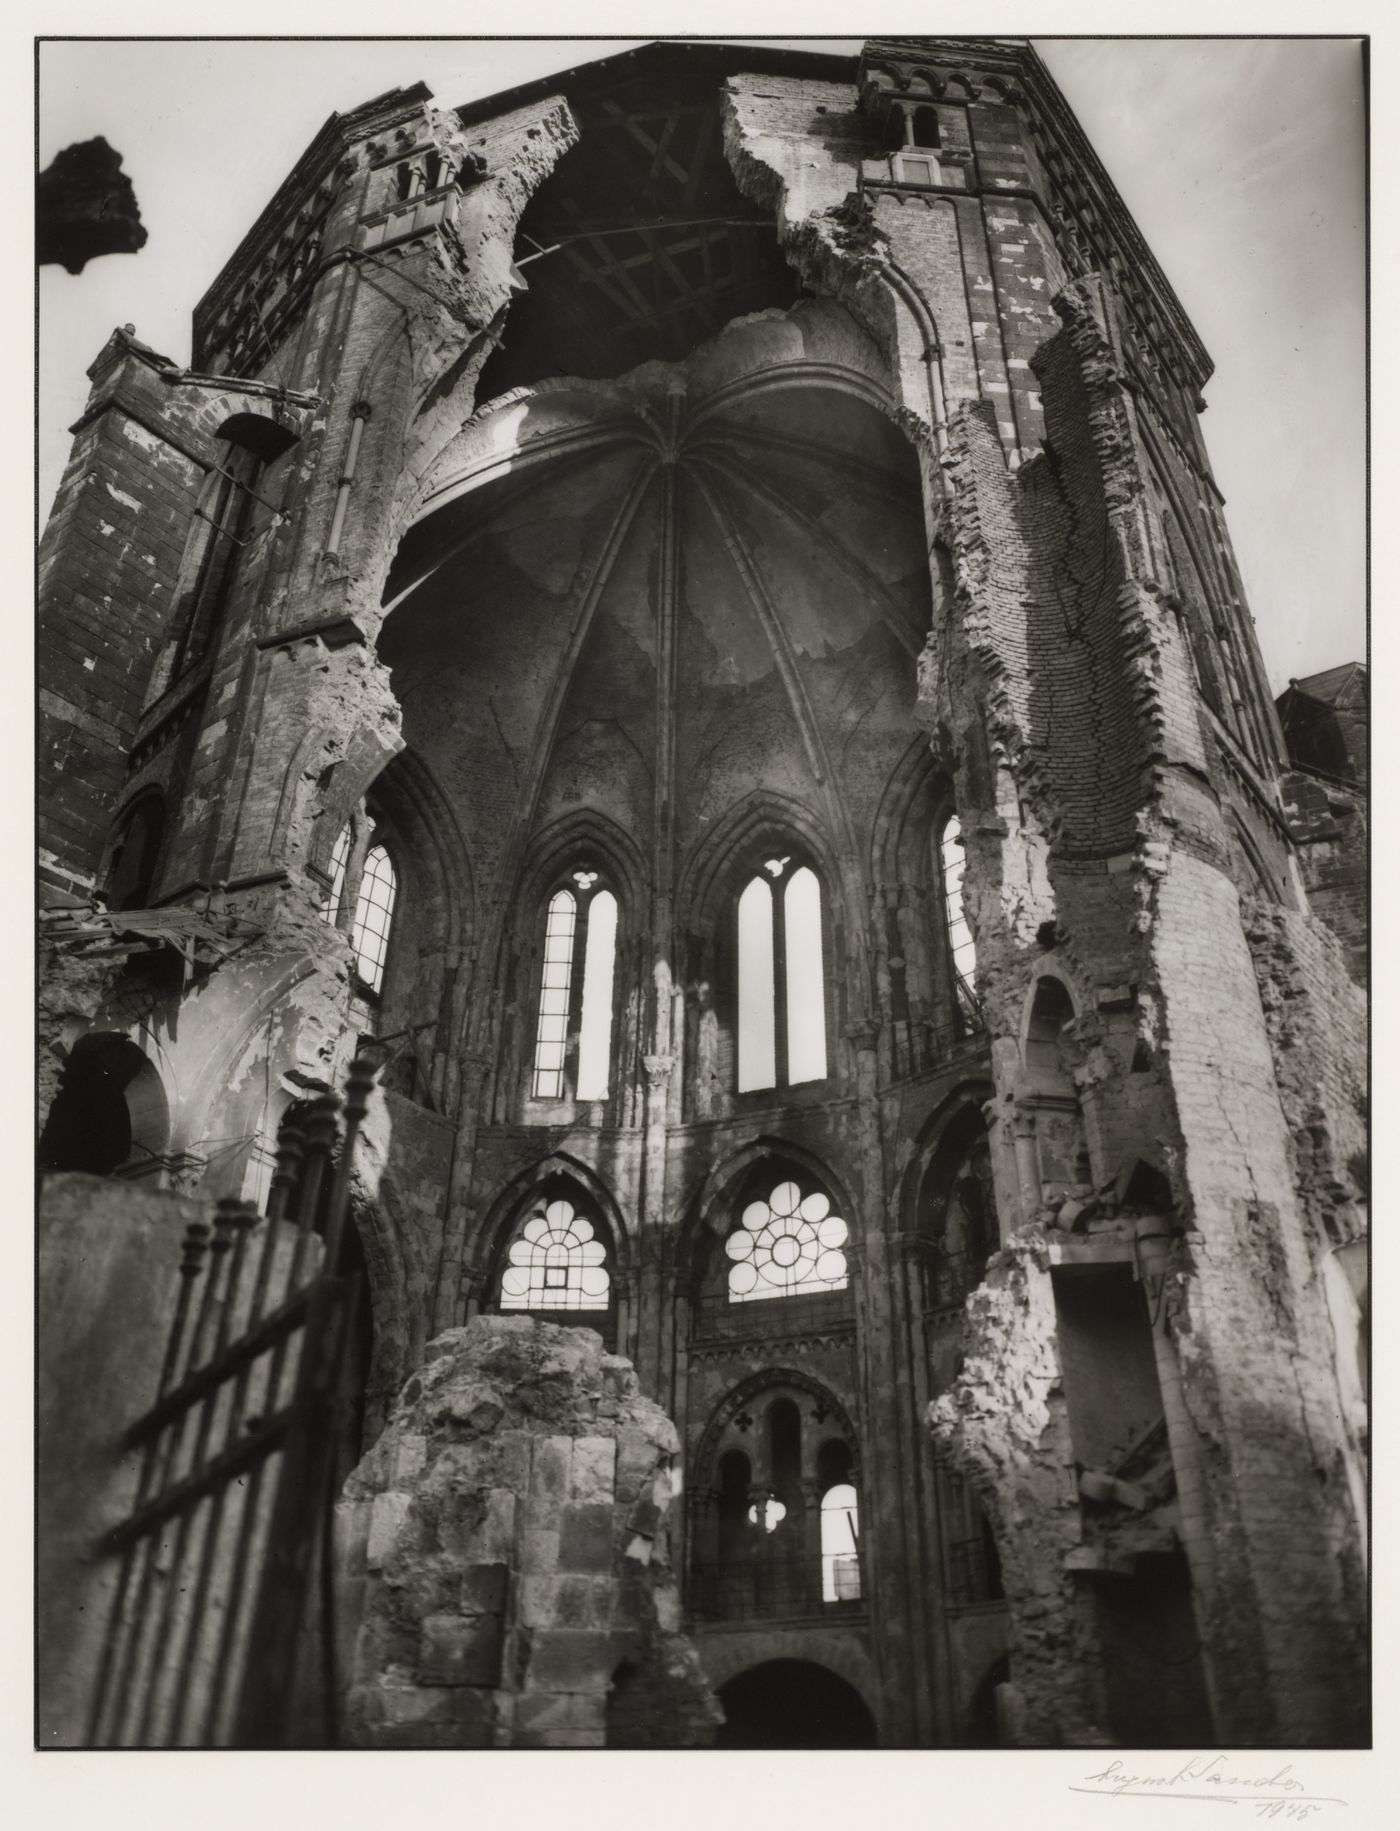 View of destruction on St. Gereon exterior, with view into interior, Cologne, Germany